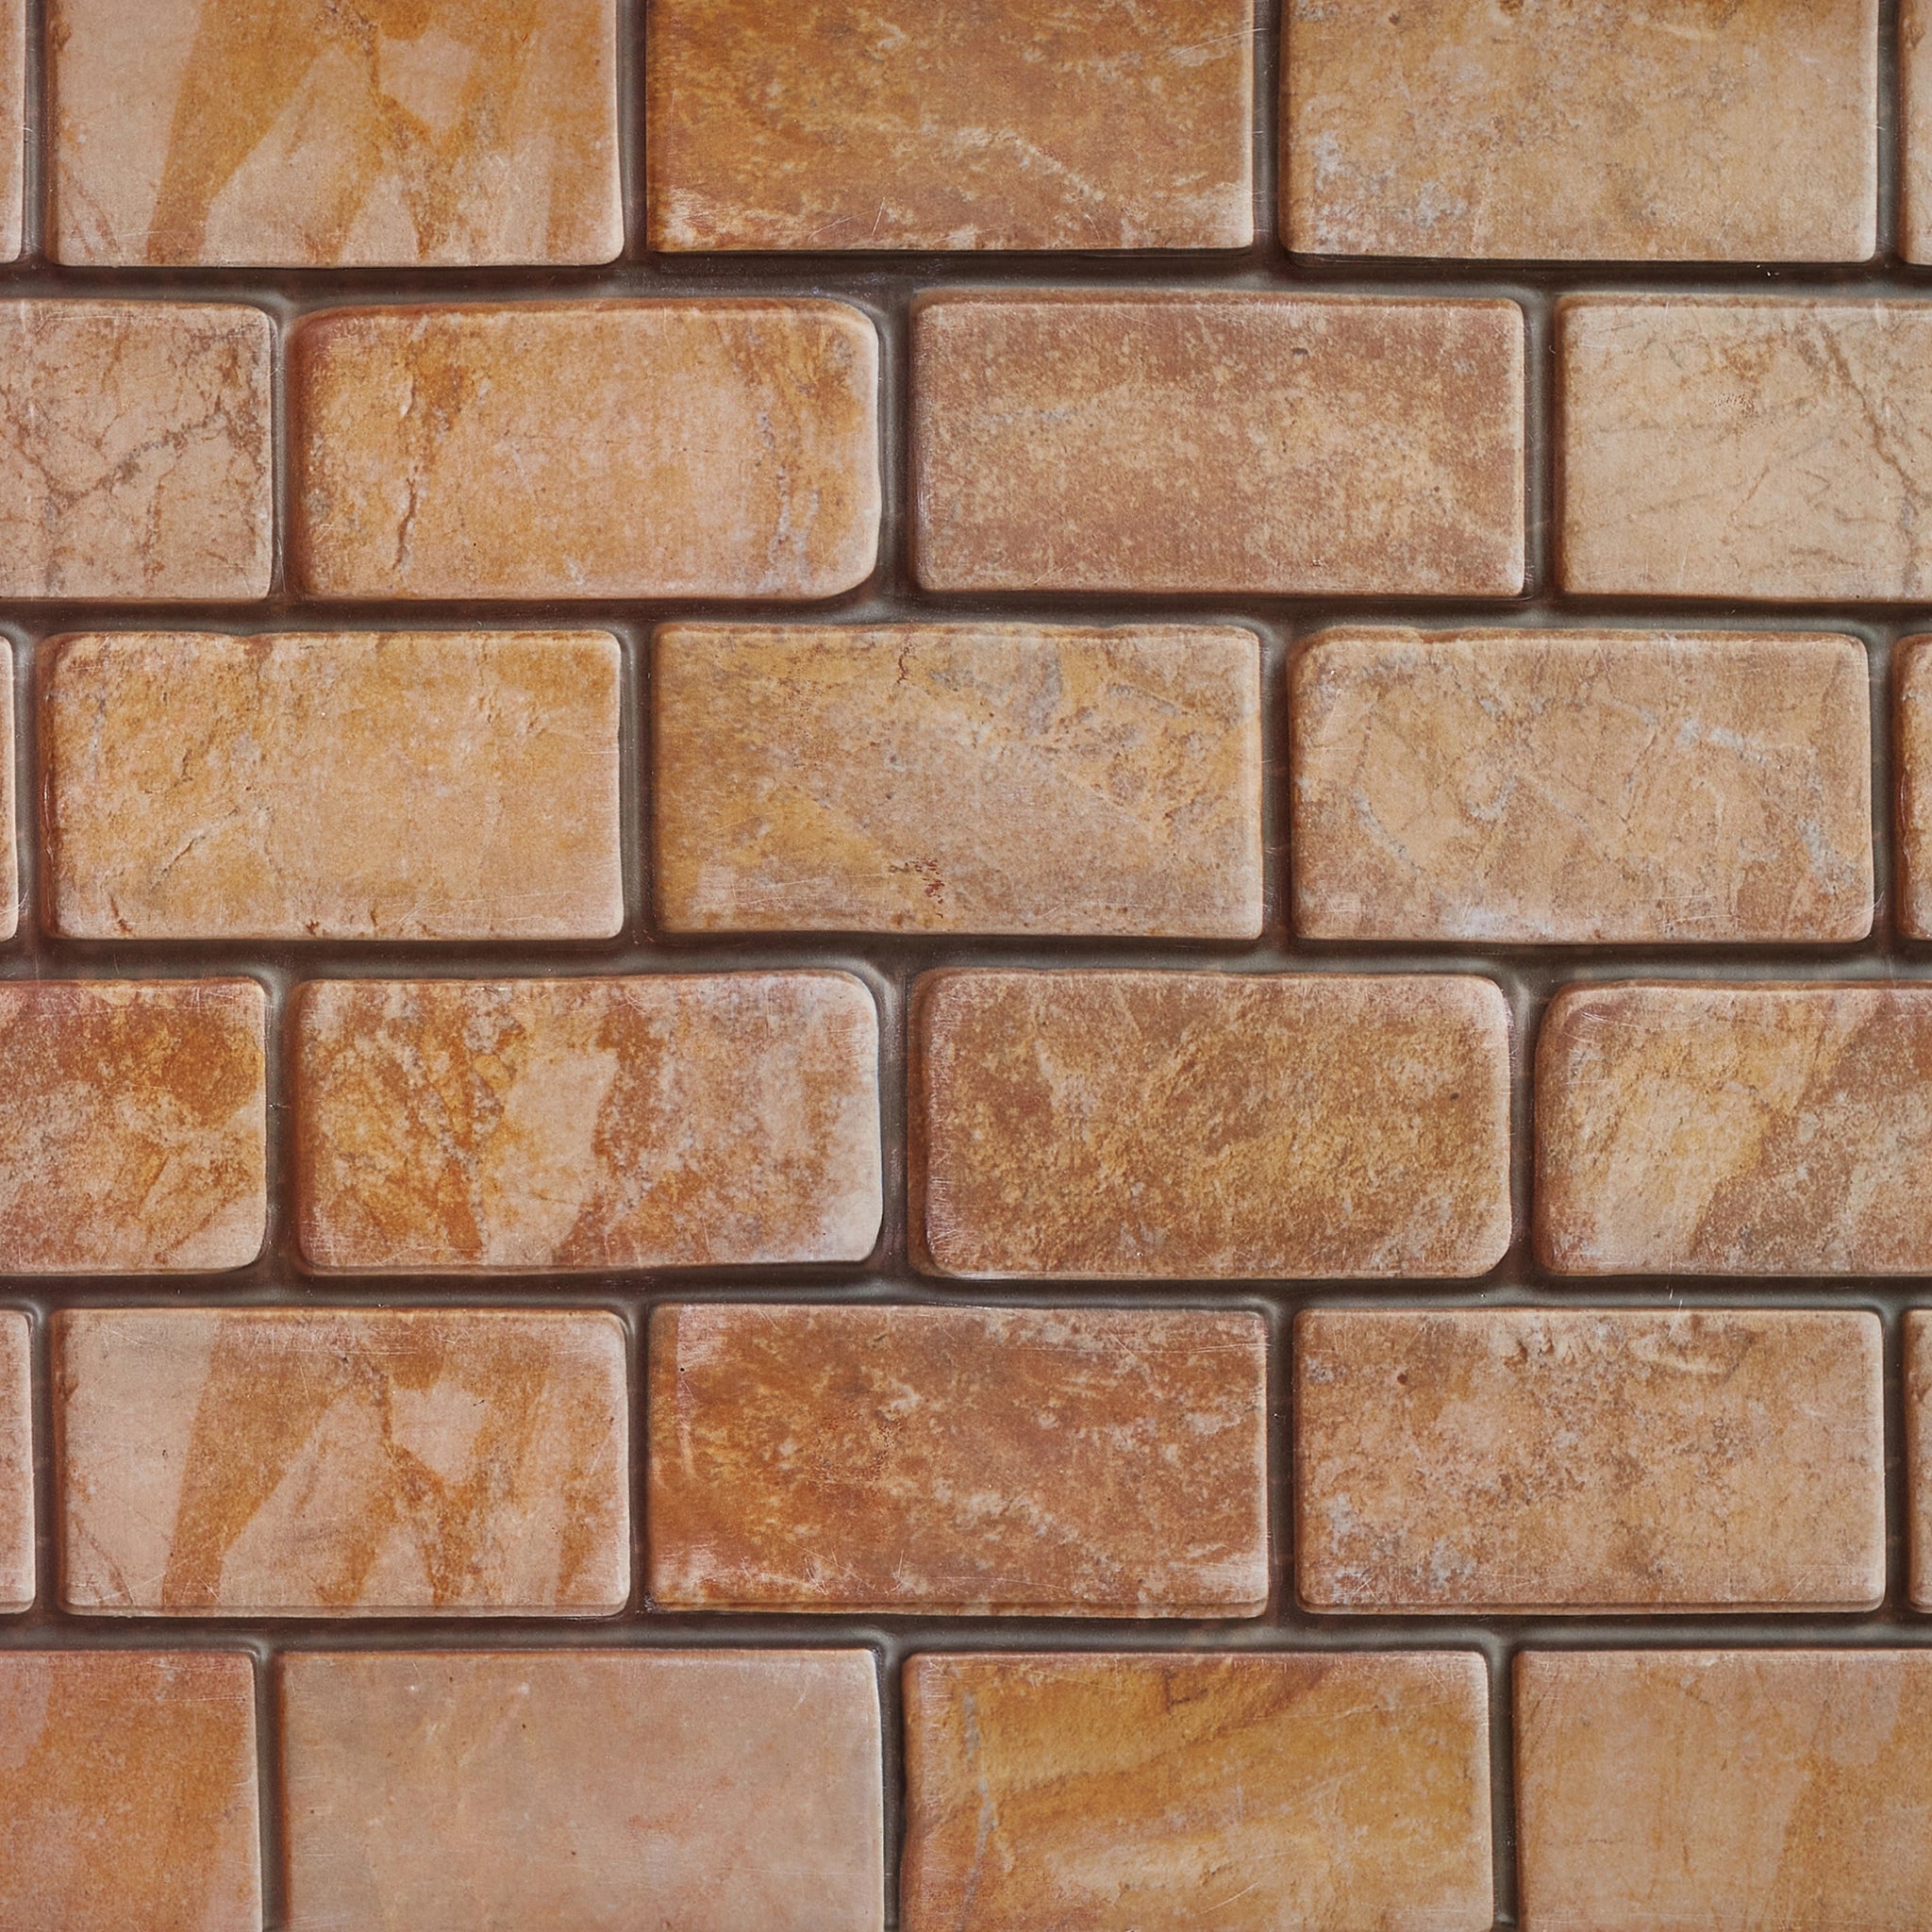 Light brown wall panel with geometric patterns, close-up view